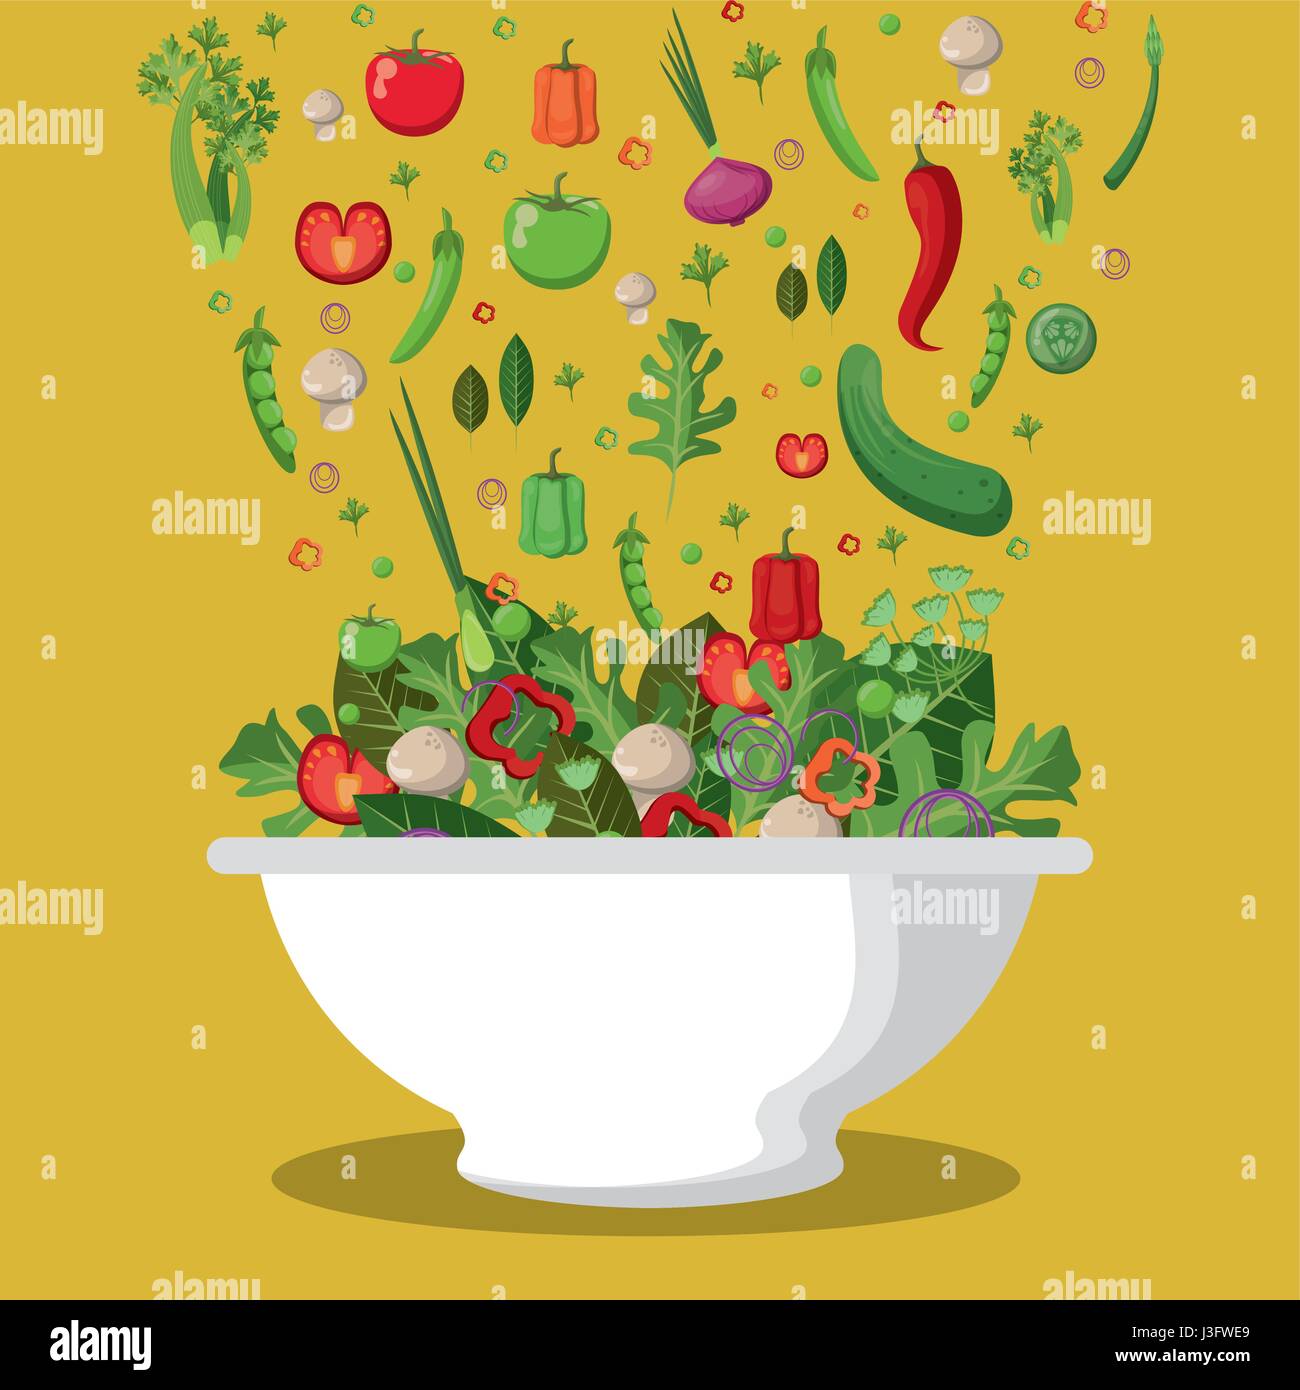 salad mixed vegetables diet food fall image Stock Vector